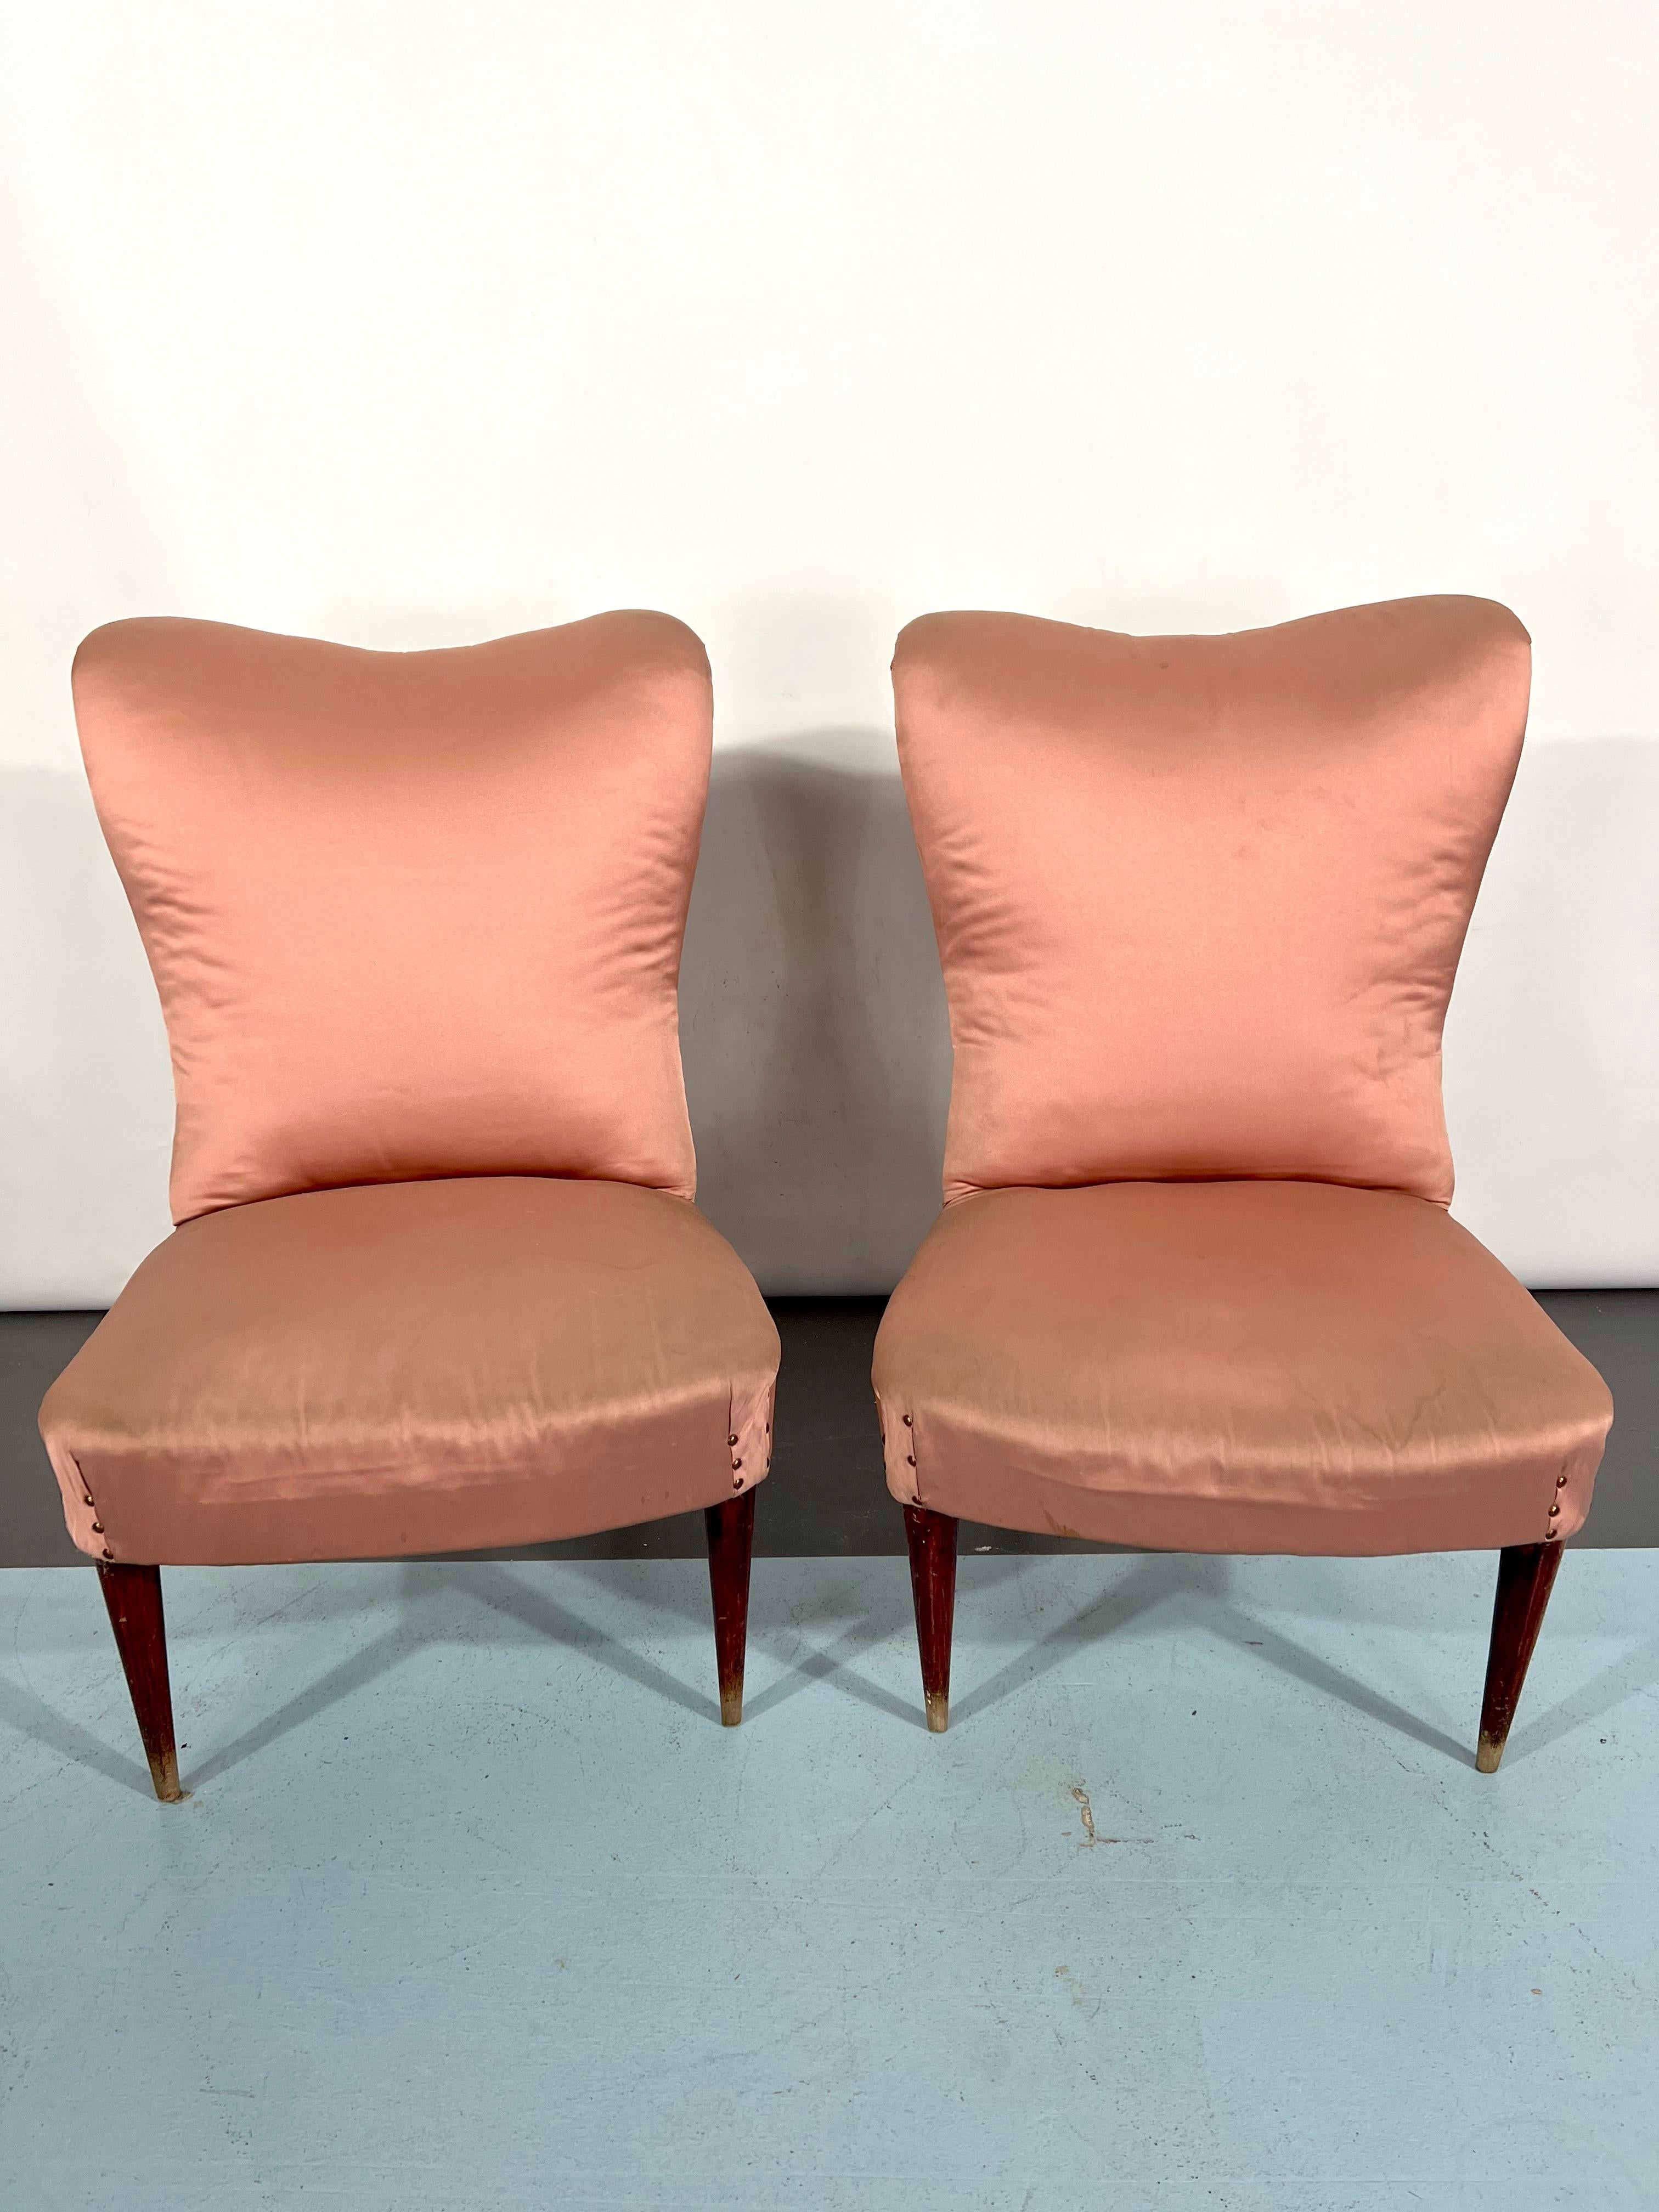 Italian Vintage Pair of Club Armchairs in the Manner of Gio Ponti, 1950s For Sale 7